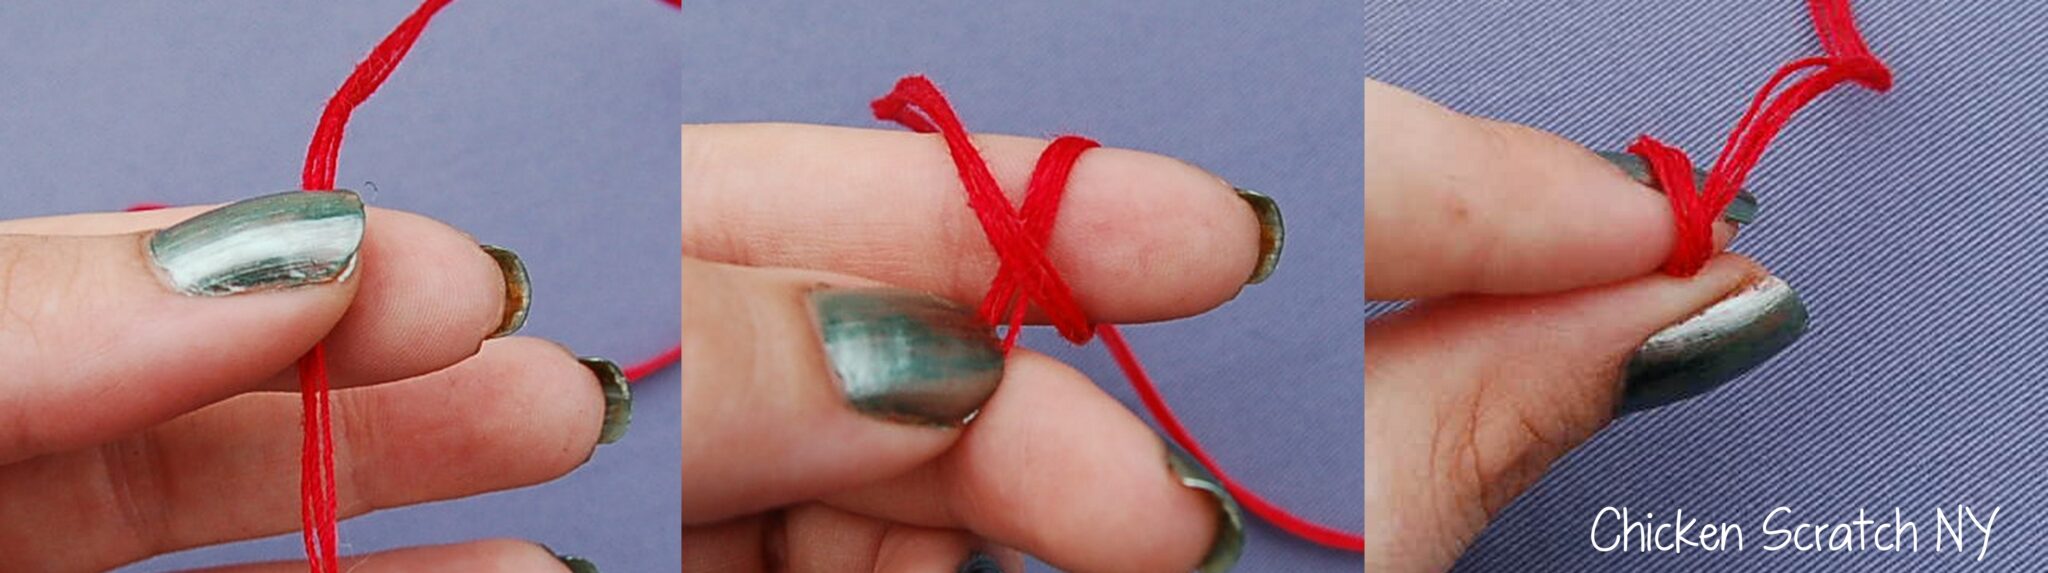 Threading a needle and tying a knot - yarn 